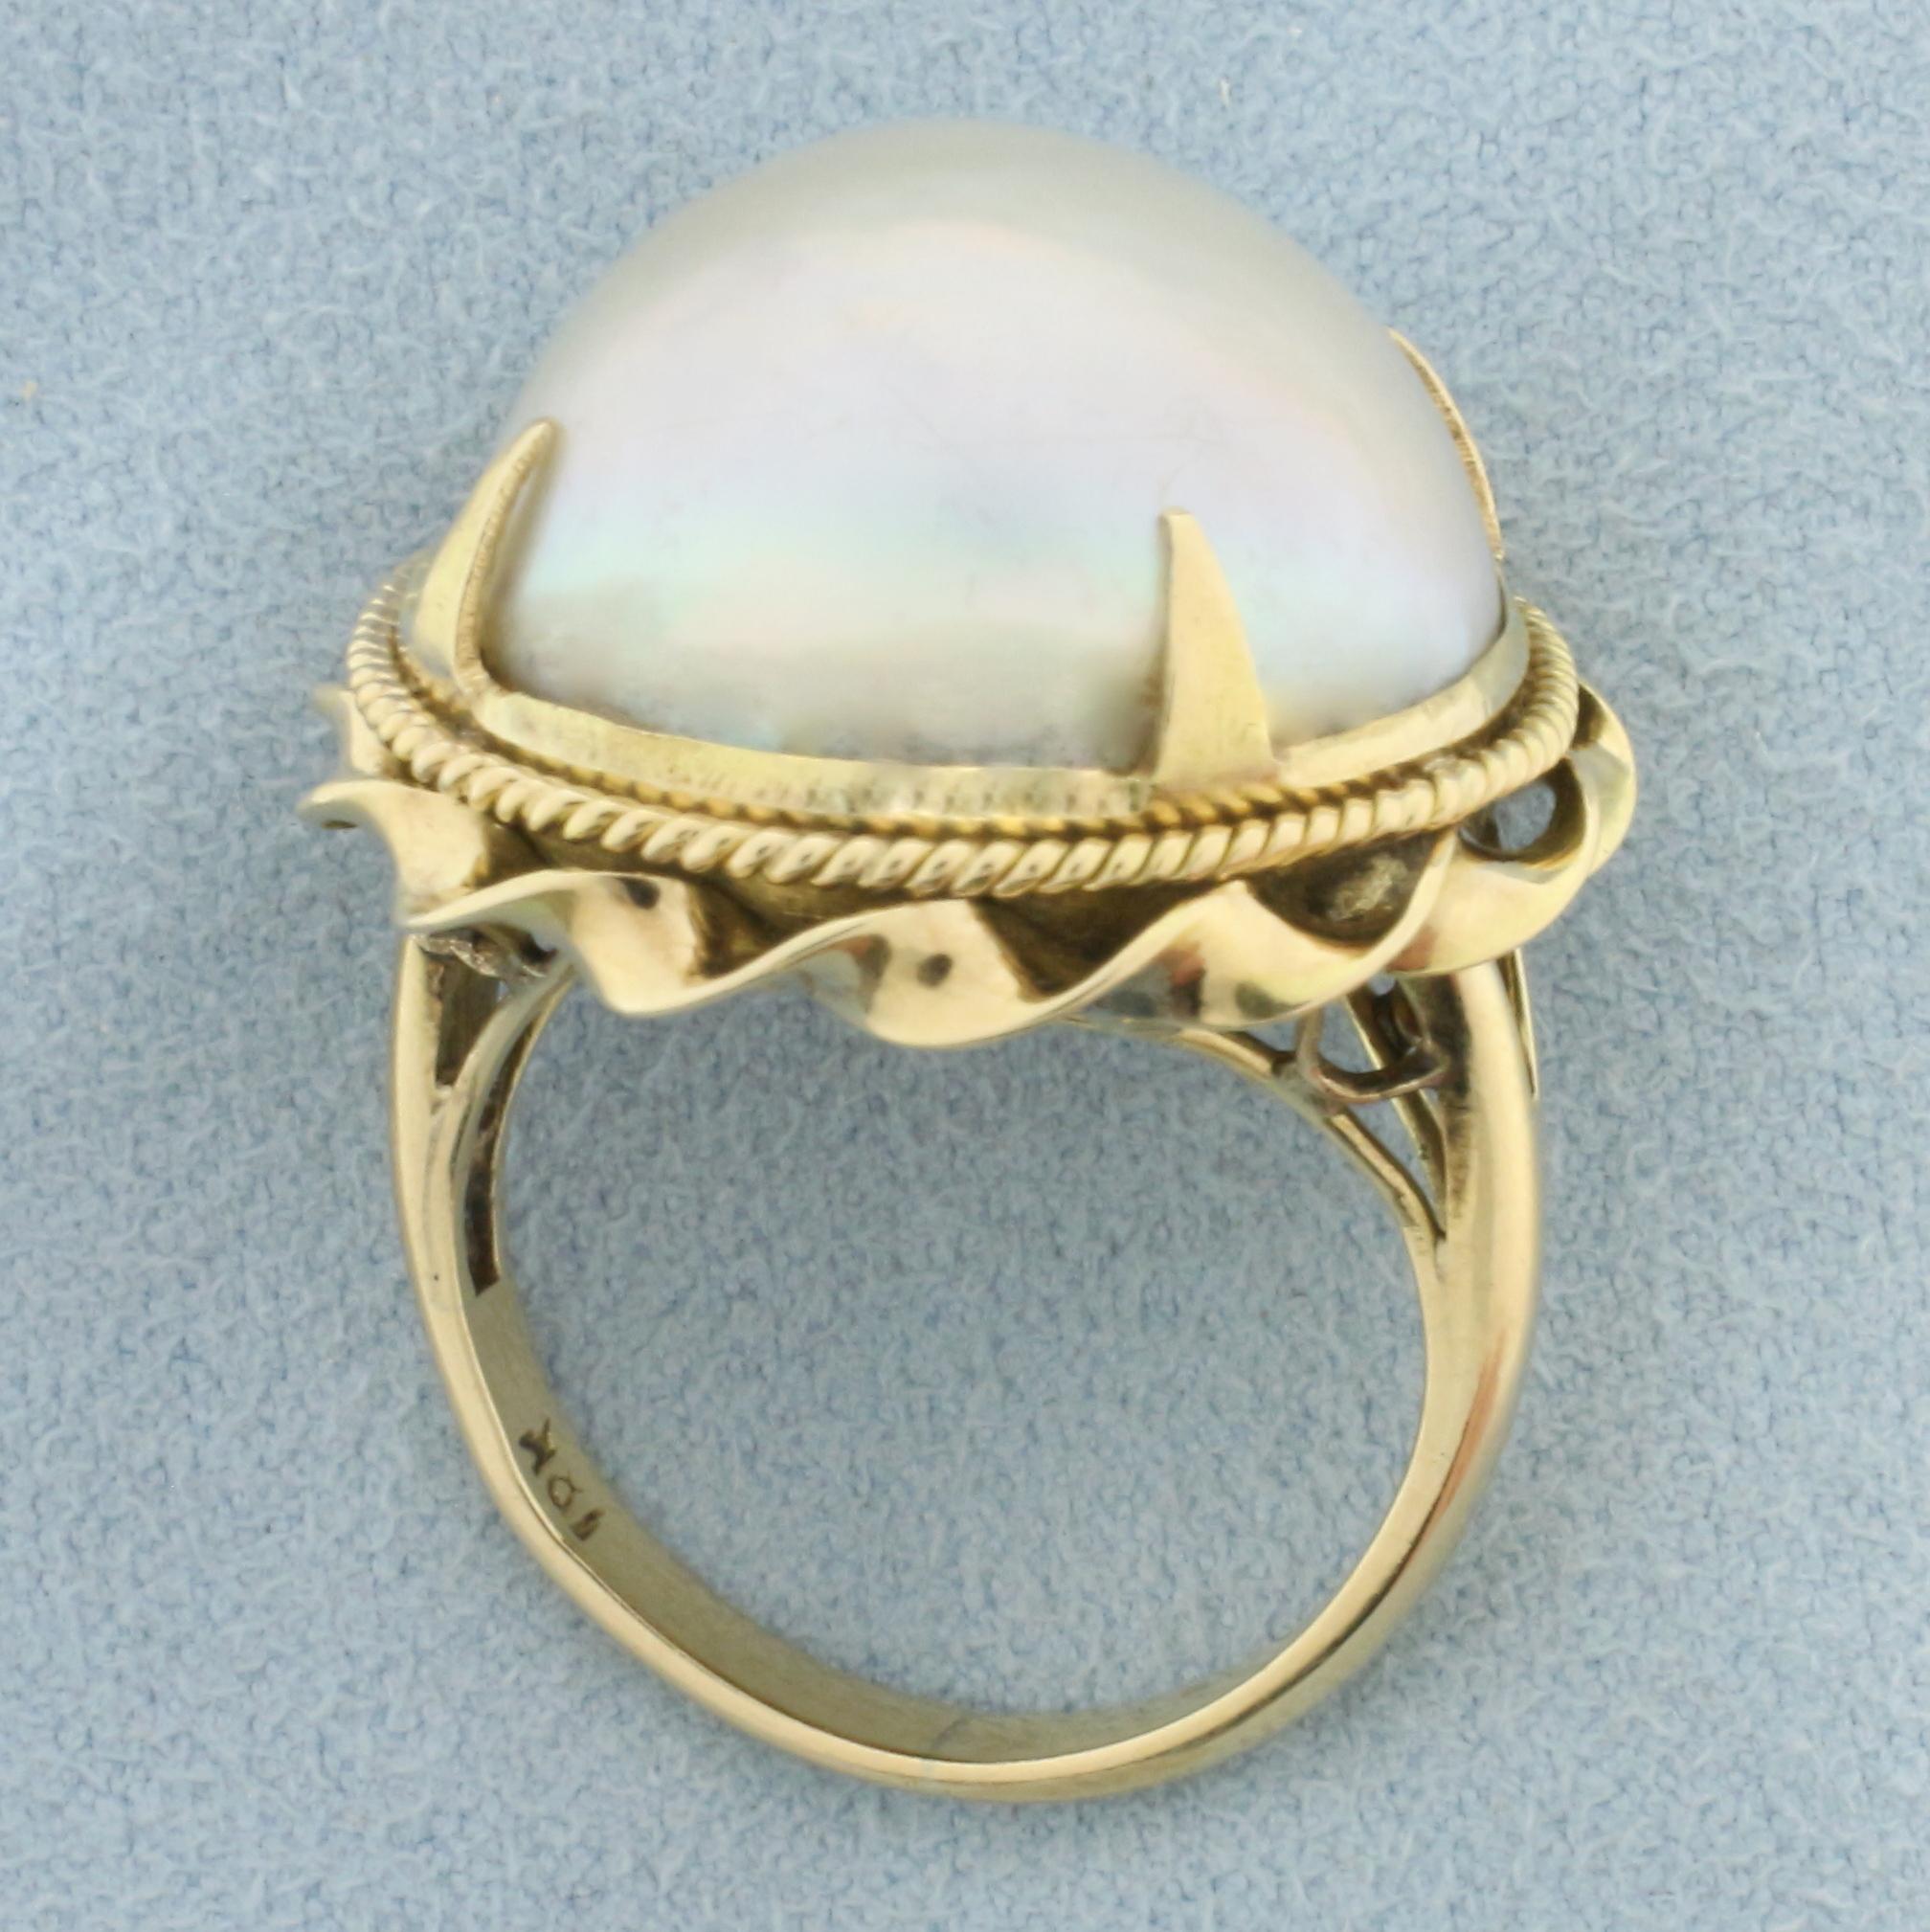 Vintage Mother Of Pearl Statement Ring In 10k Yellow Gold